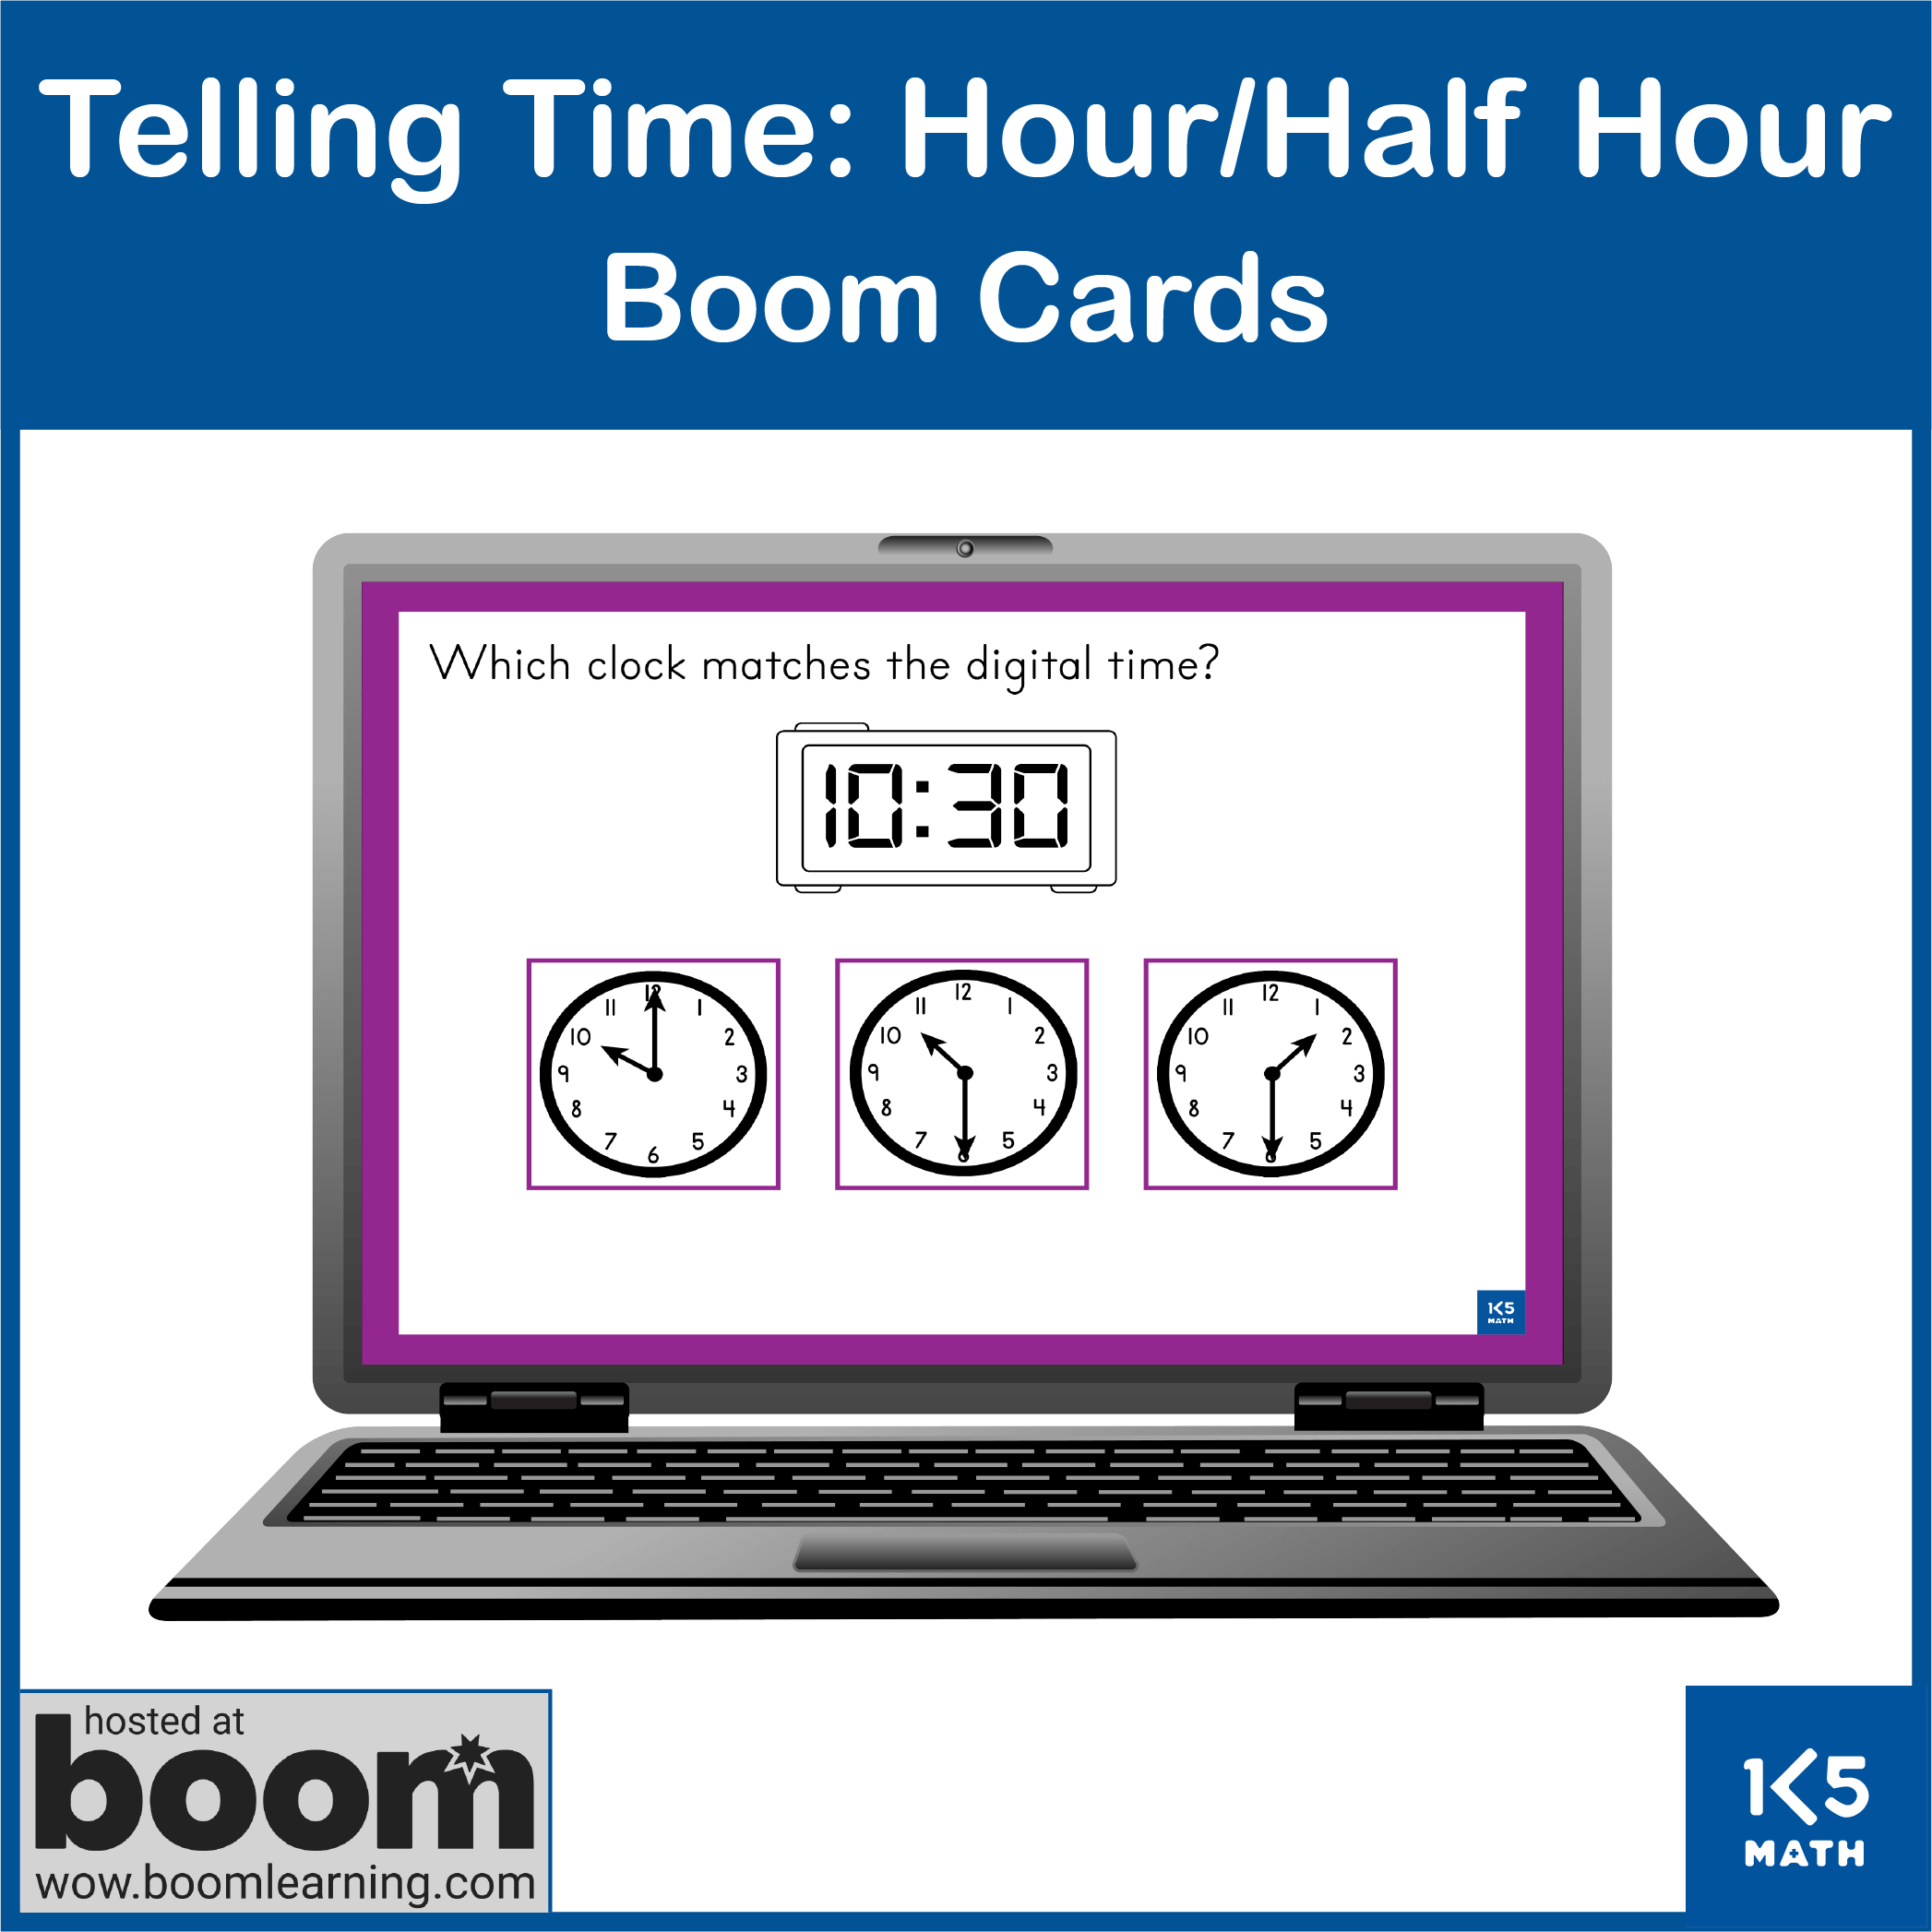 Boom Cards: Telling Time to the Hour/Half Hour